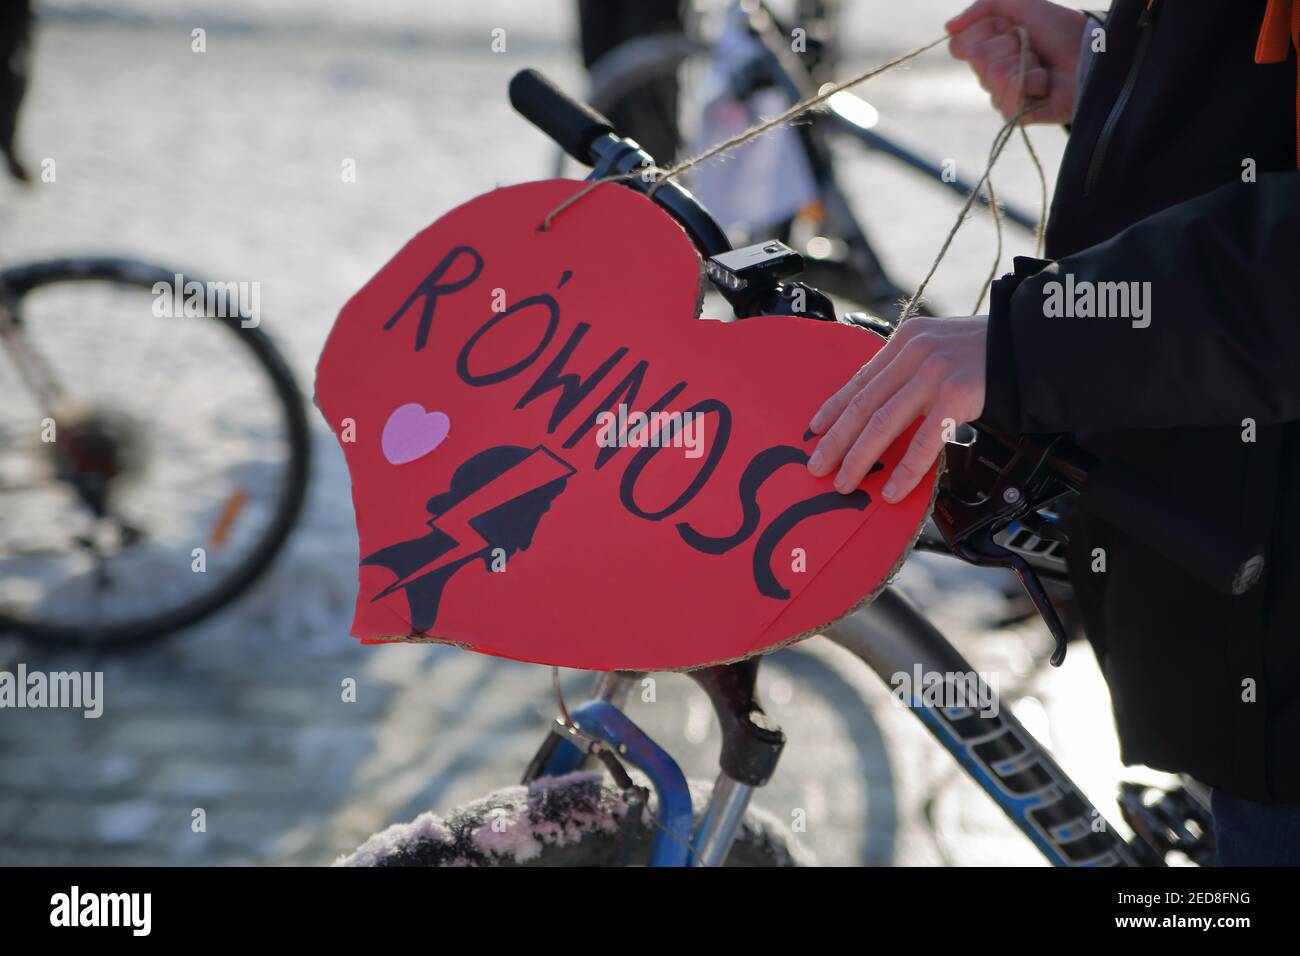 Read heart with word EQUALITY in Polish, symbols of Women Strike movement, decorate bicycle while protester support feminists rights in Poland Stock Photo